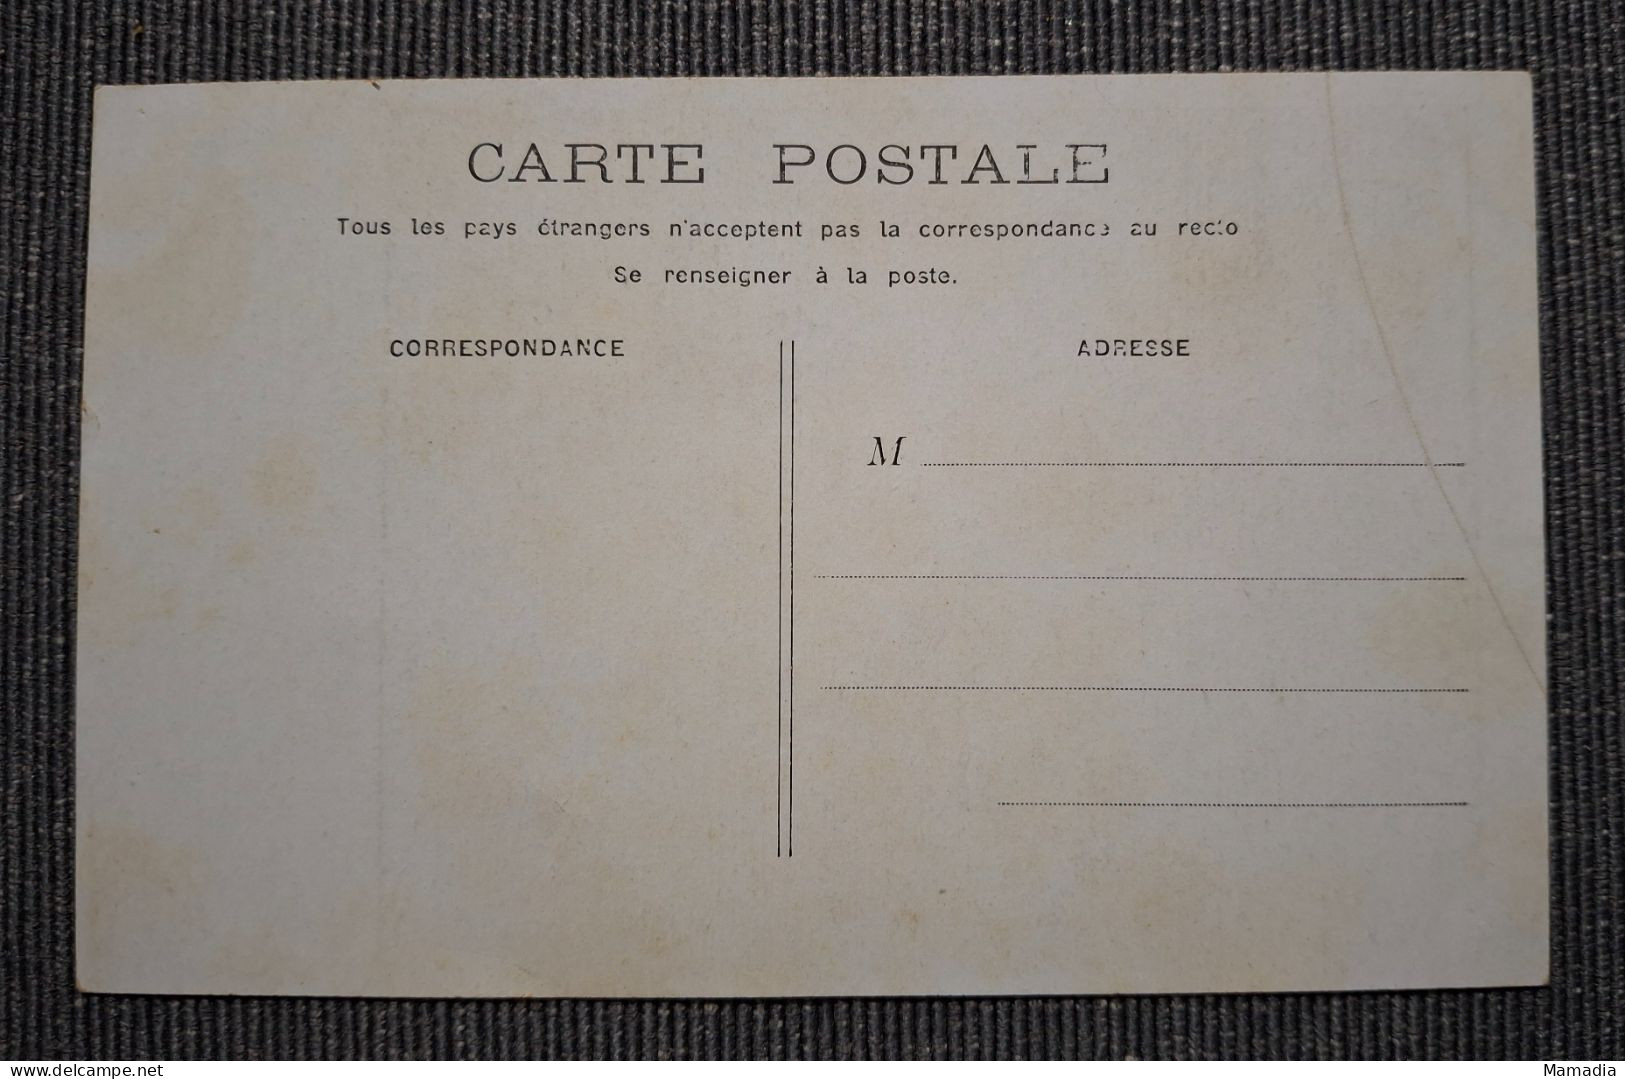 CARTE POSTALE ANCIENNE CYCLE VELO SERIE "MADEMOISELLE ECOUTEZ-MOI DONC" N°2 / 6 - Coppie